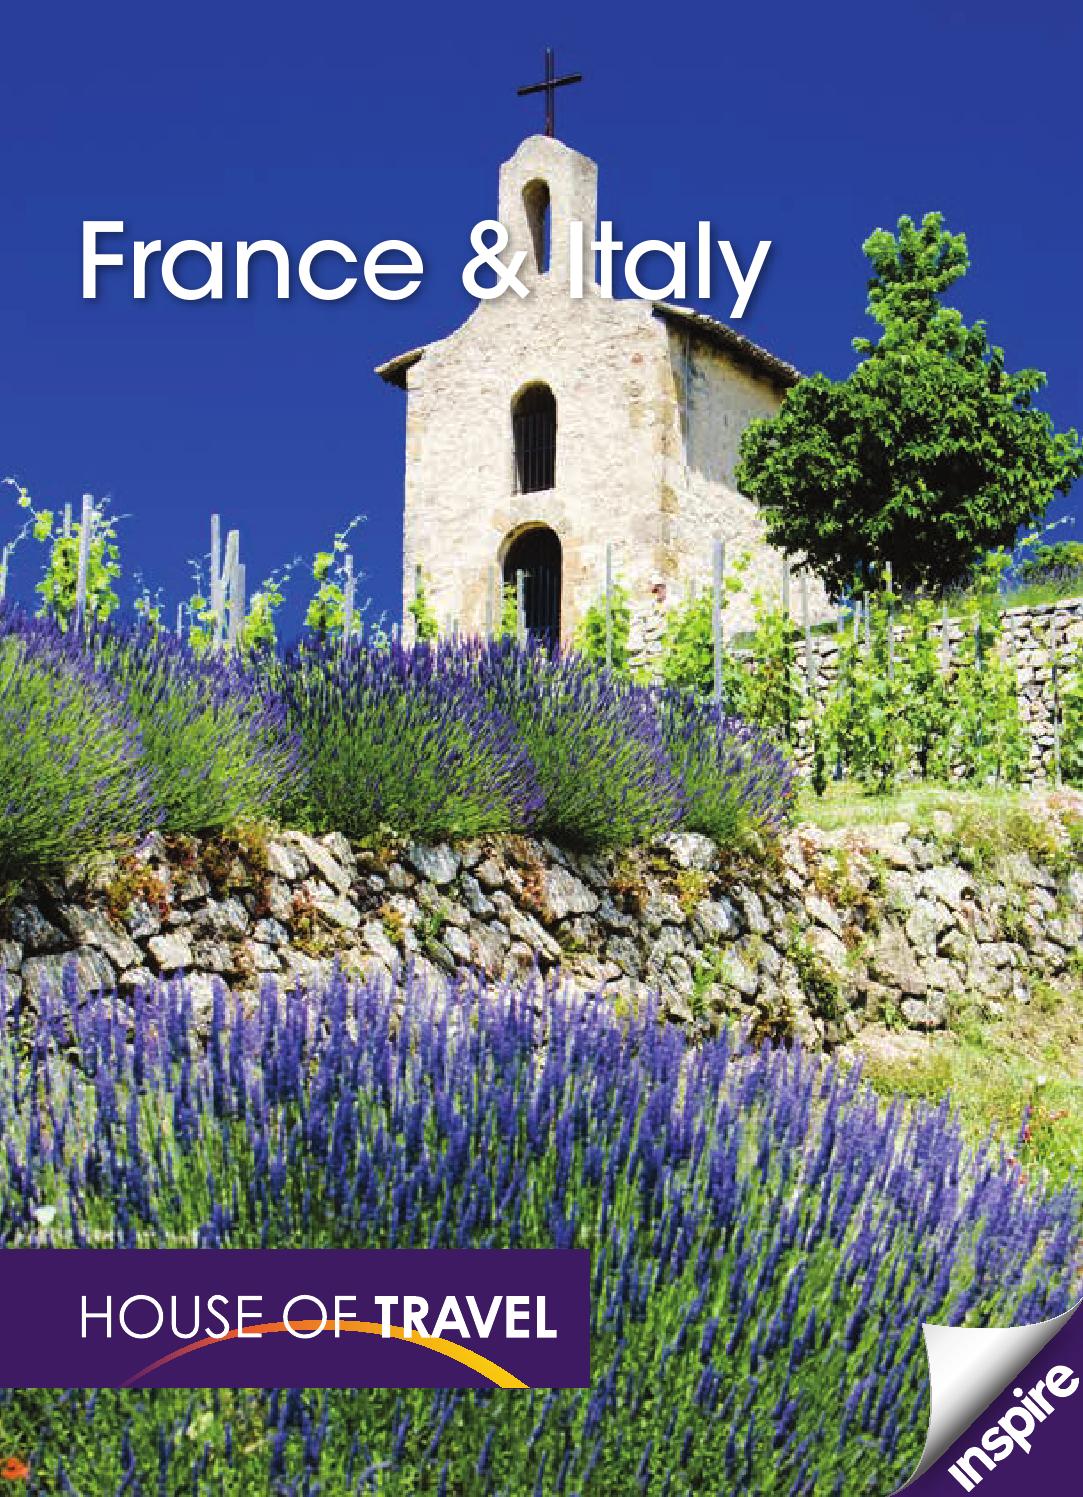 Jardin Des Plantes D Angers Charmant France & Italy Brochure 2016 by House Of Travel issuu